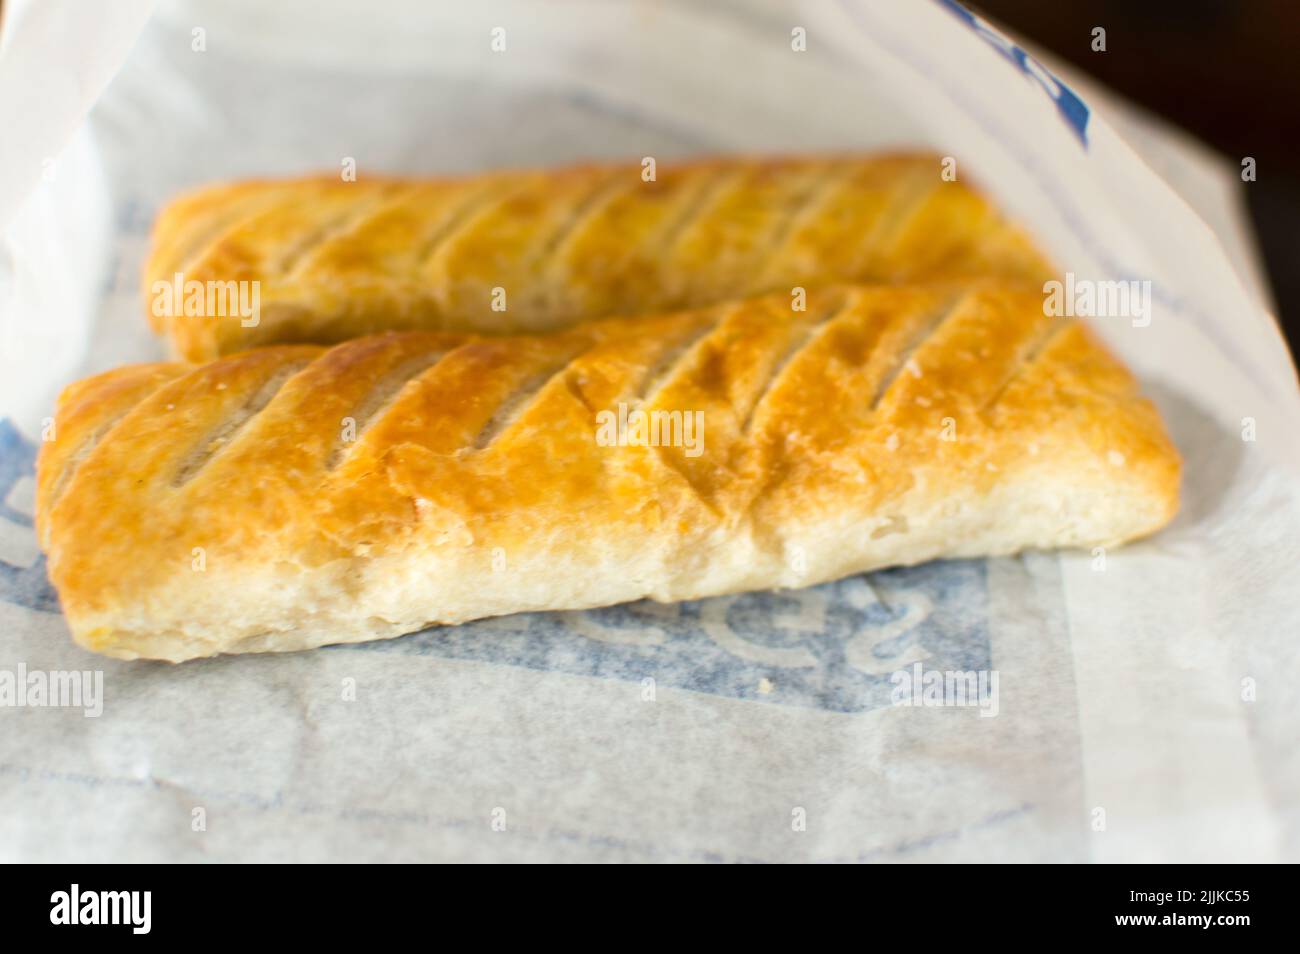 Sausage roll in a white paper bag Stock Photo